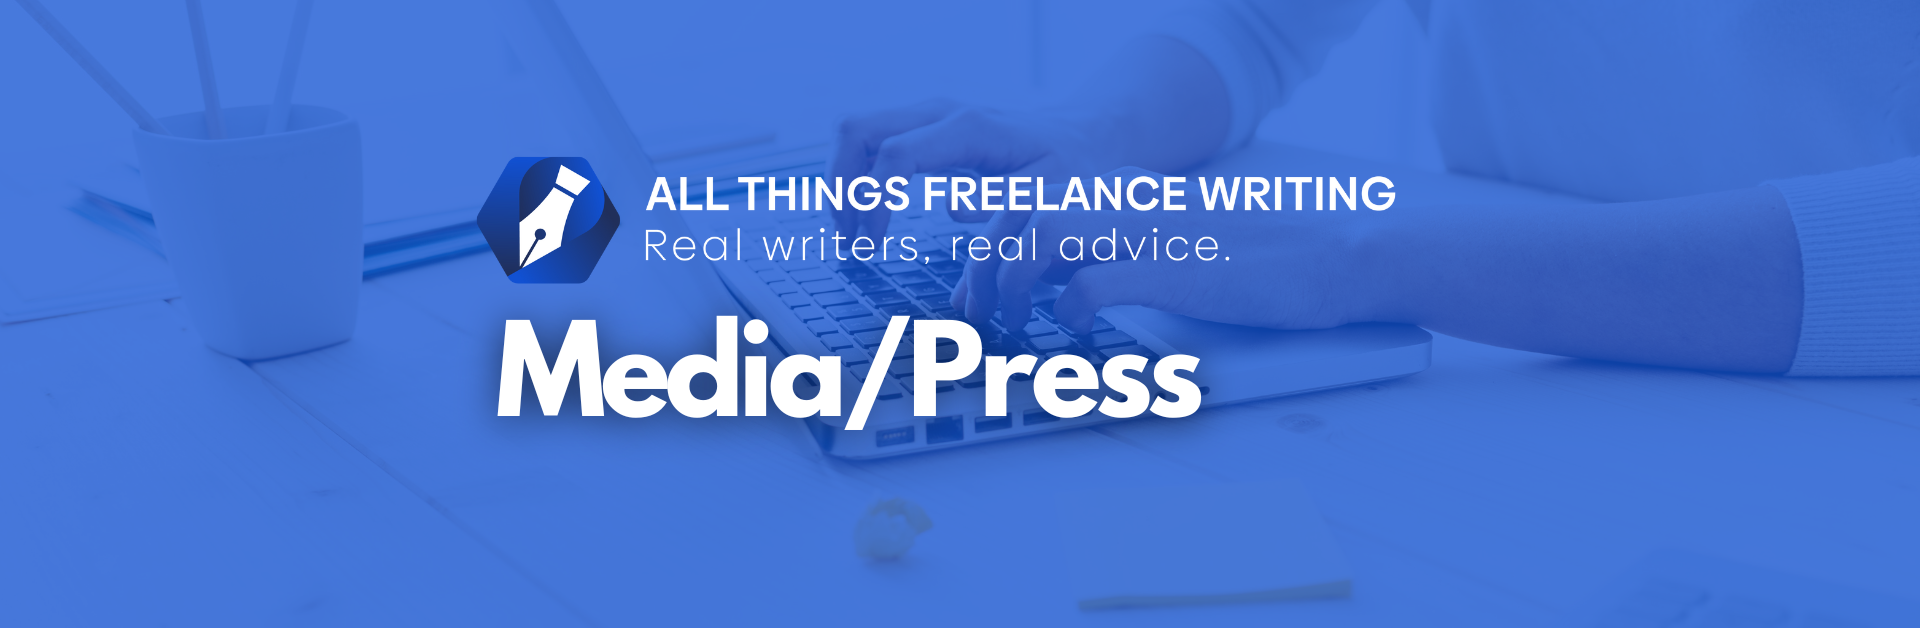 All Things Freelance Writing Media and Press